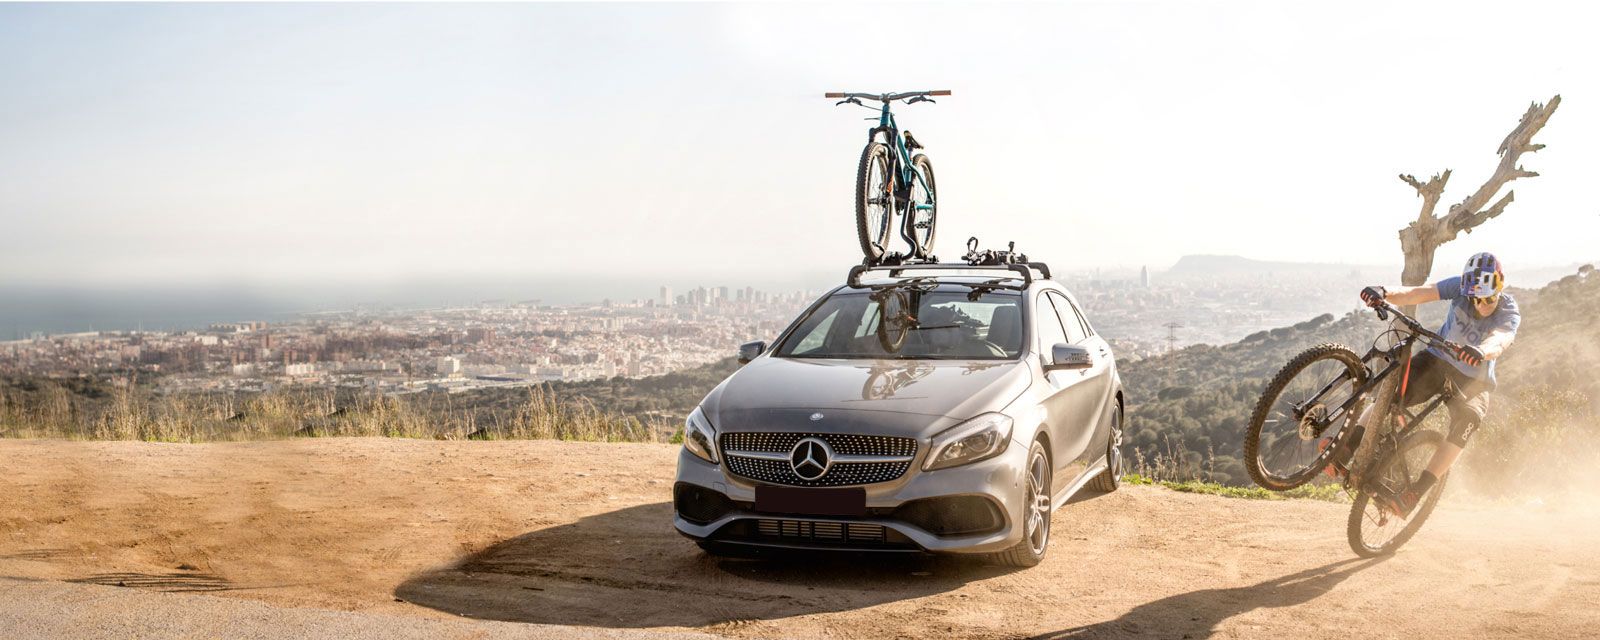 Mountain biker on a bike next to a car with a Thule roof bike rack with a city in the background.